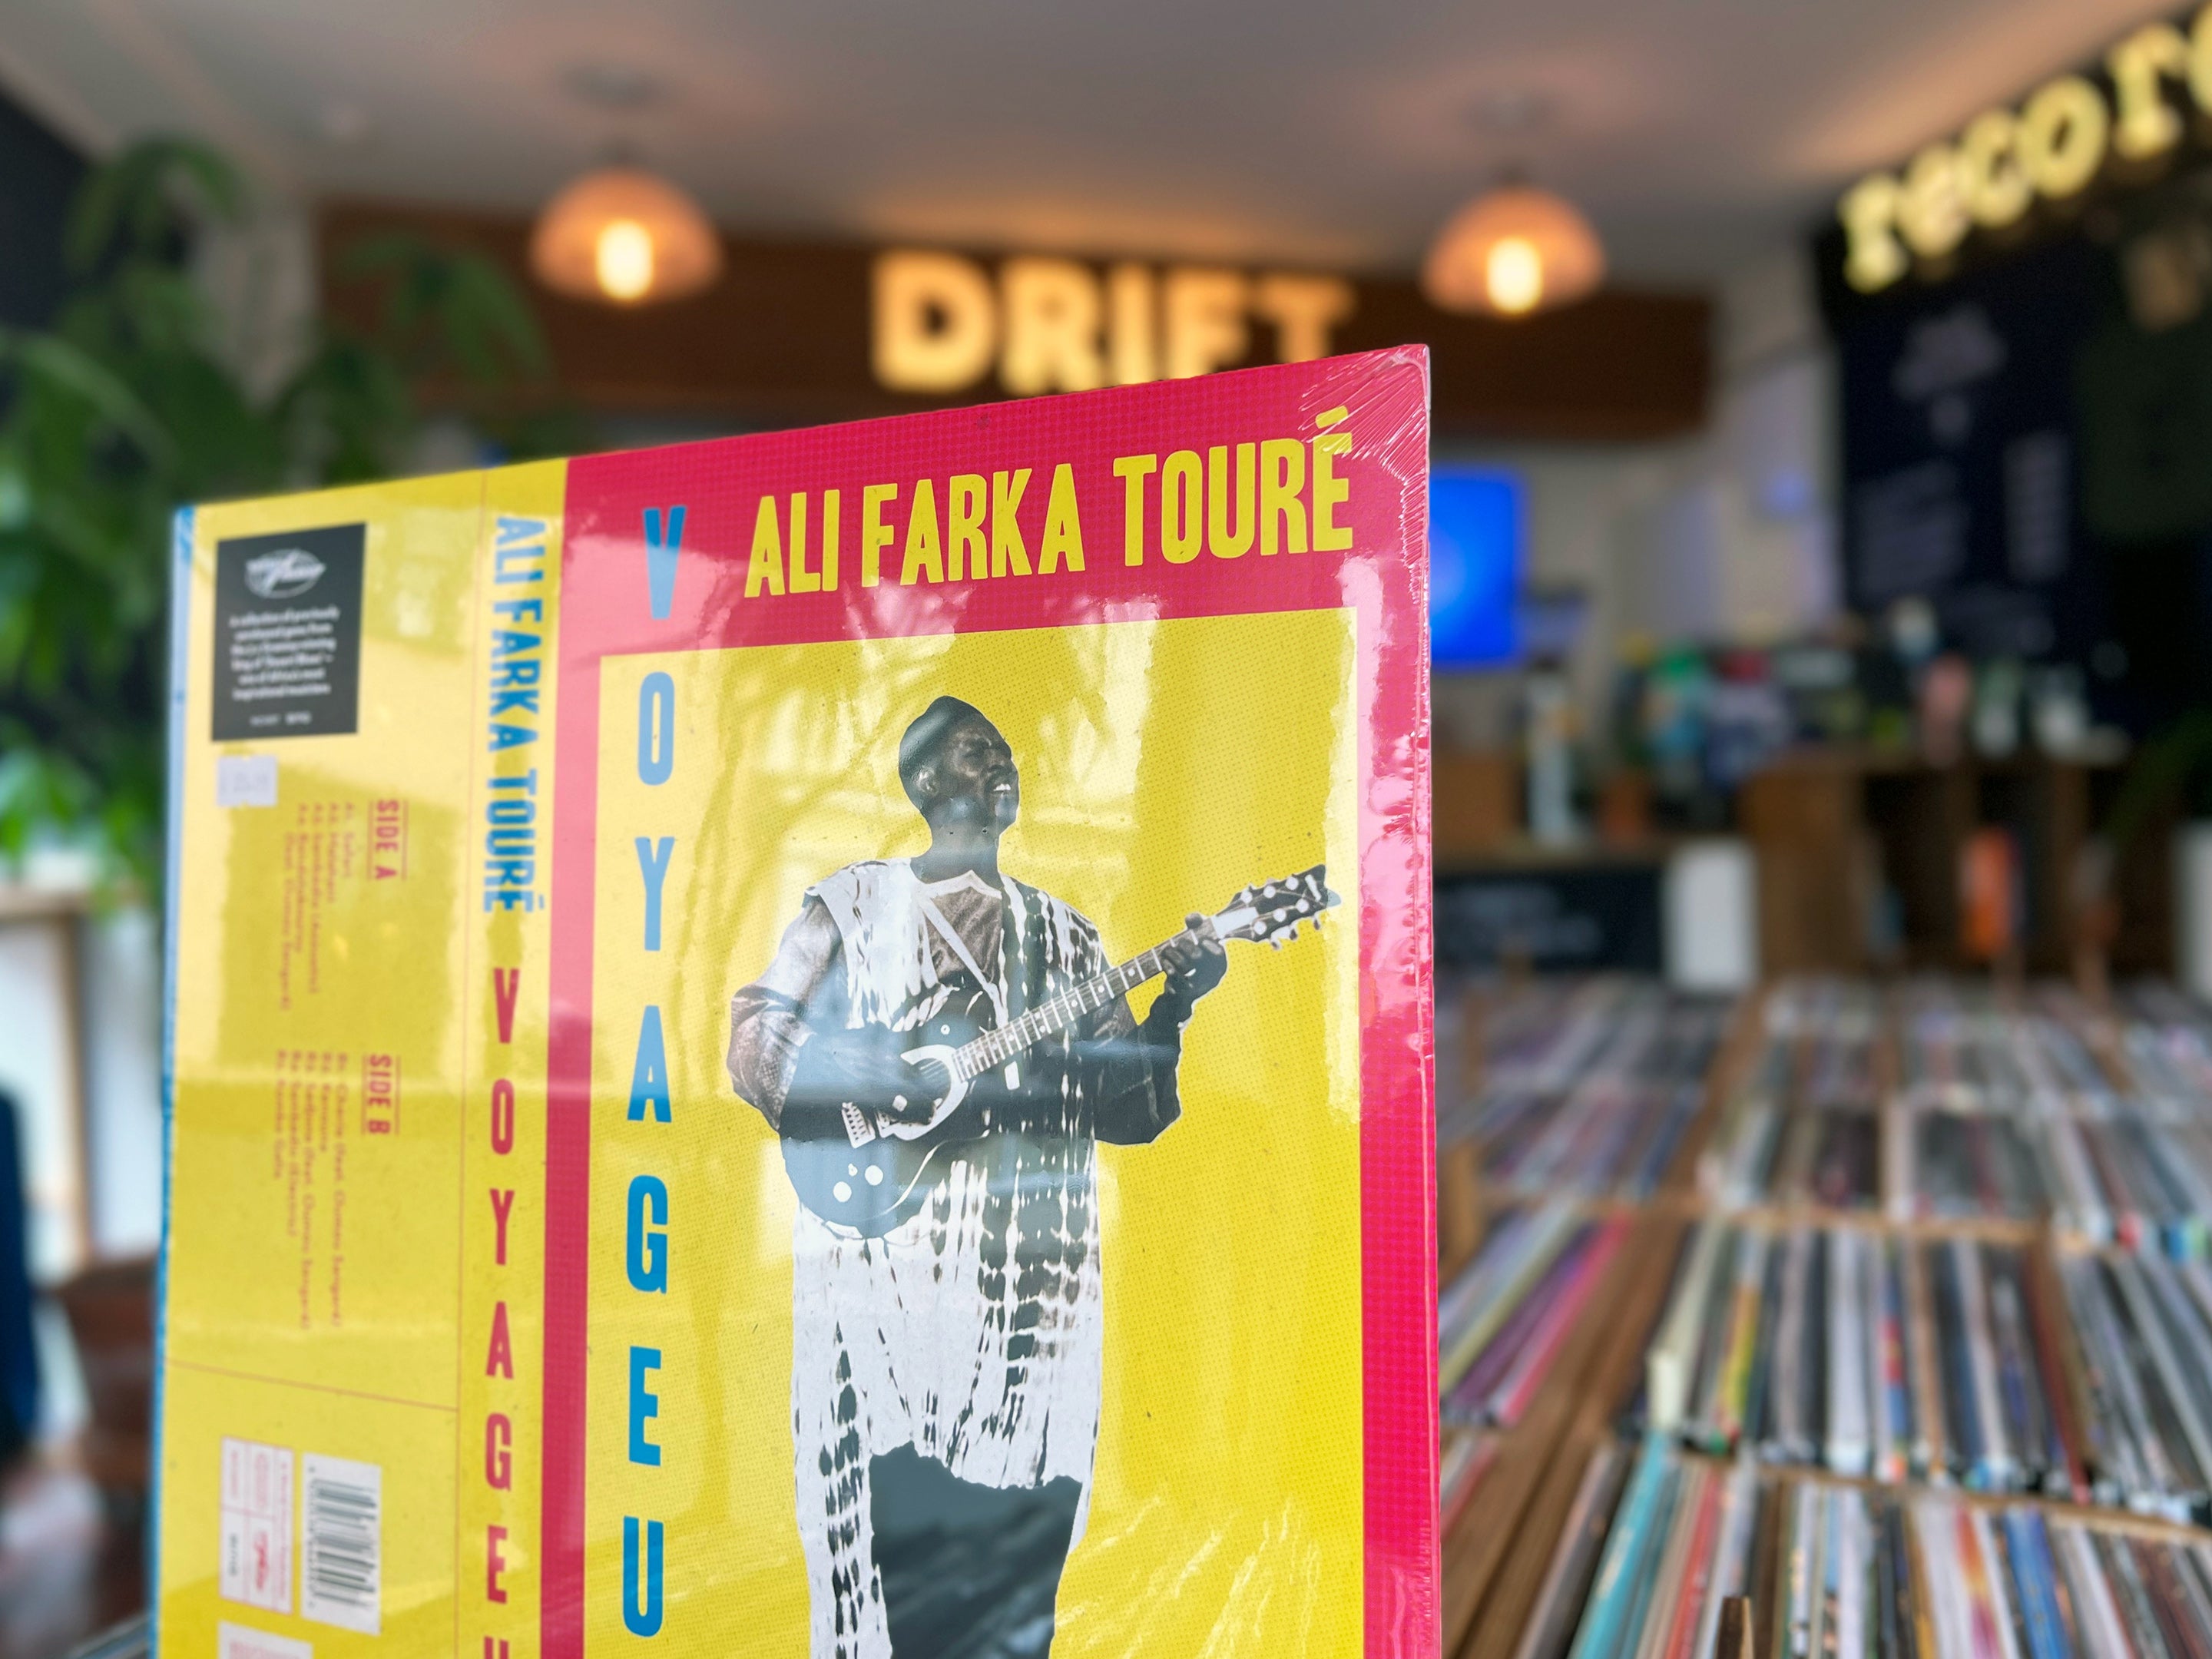 Best New Reissues: Ali Farka Touré, Dorothy Ashby & Frank Wess and The Eighties Matchbox B-Line Disaster.